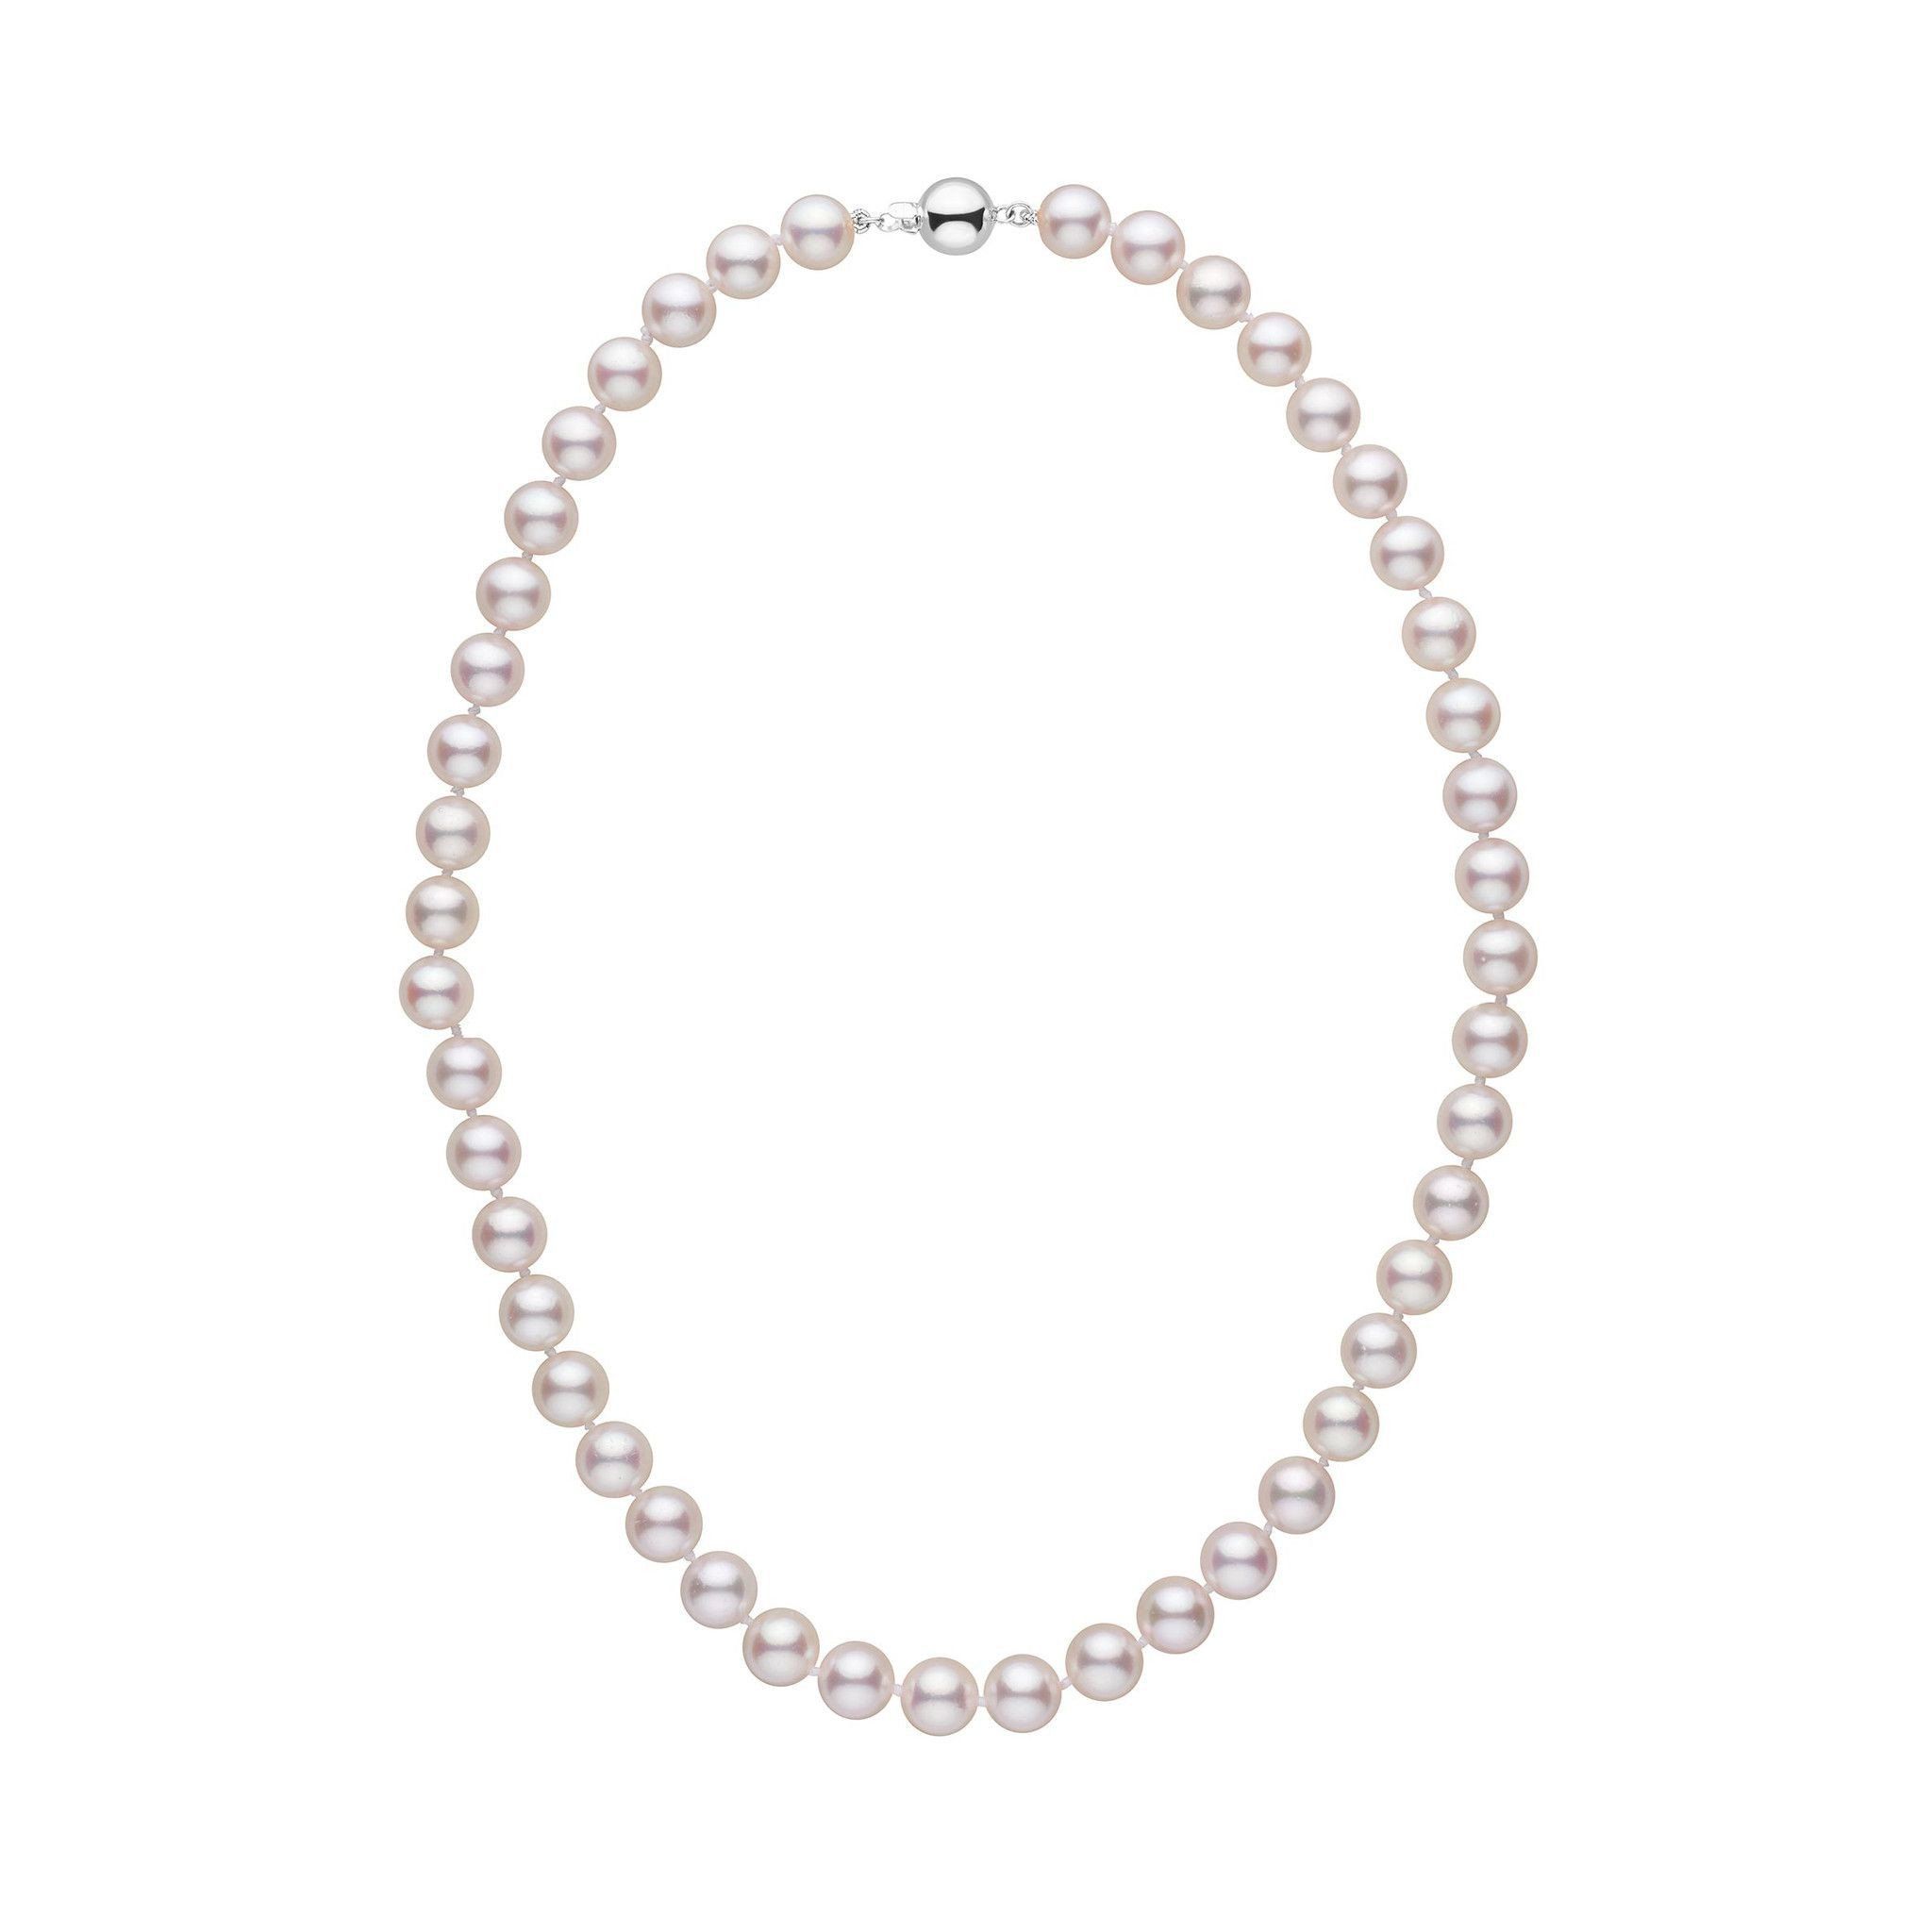 8.0-8.5 mm 16 Inch AA+ White Akoya Pearl Necklace white gold